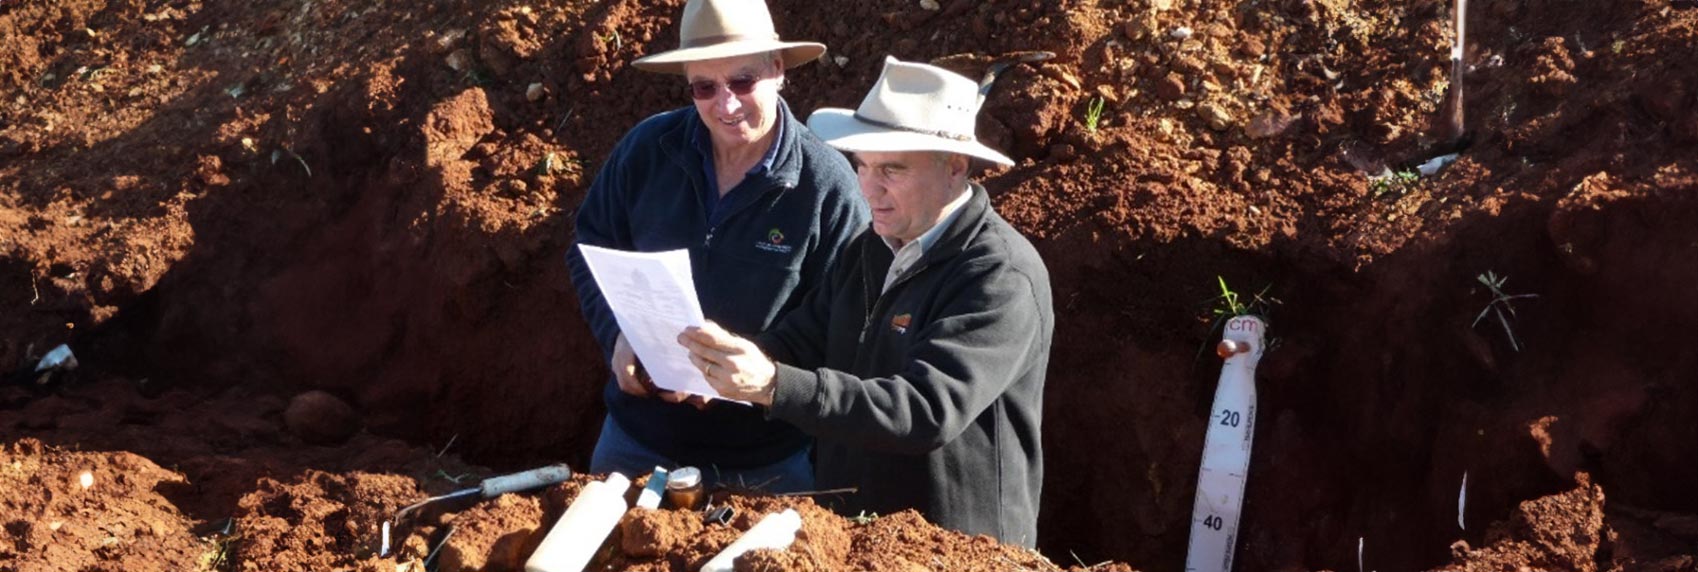 Soil structure assessment is a cornerstone of rural land management in Australia